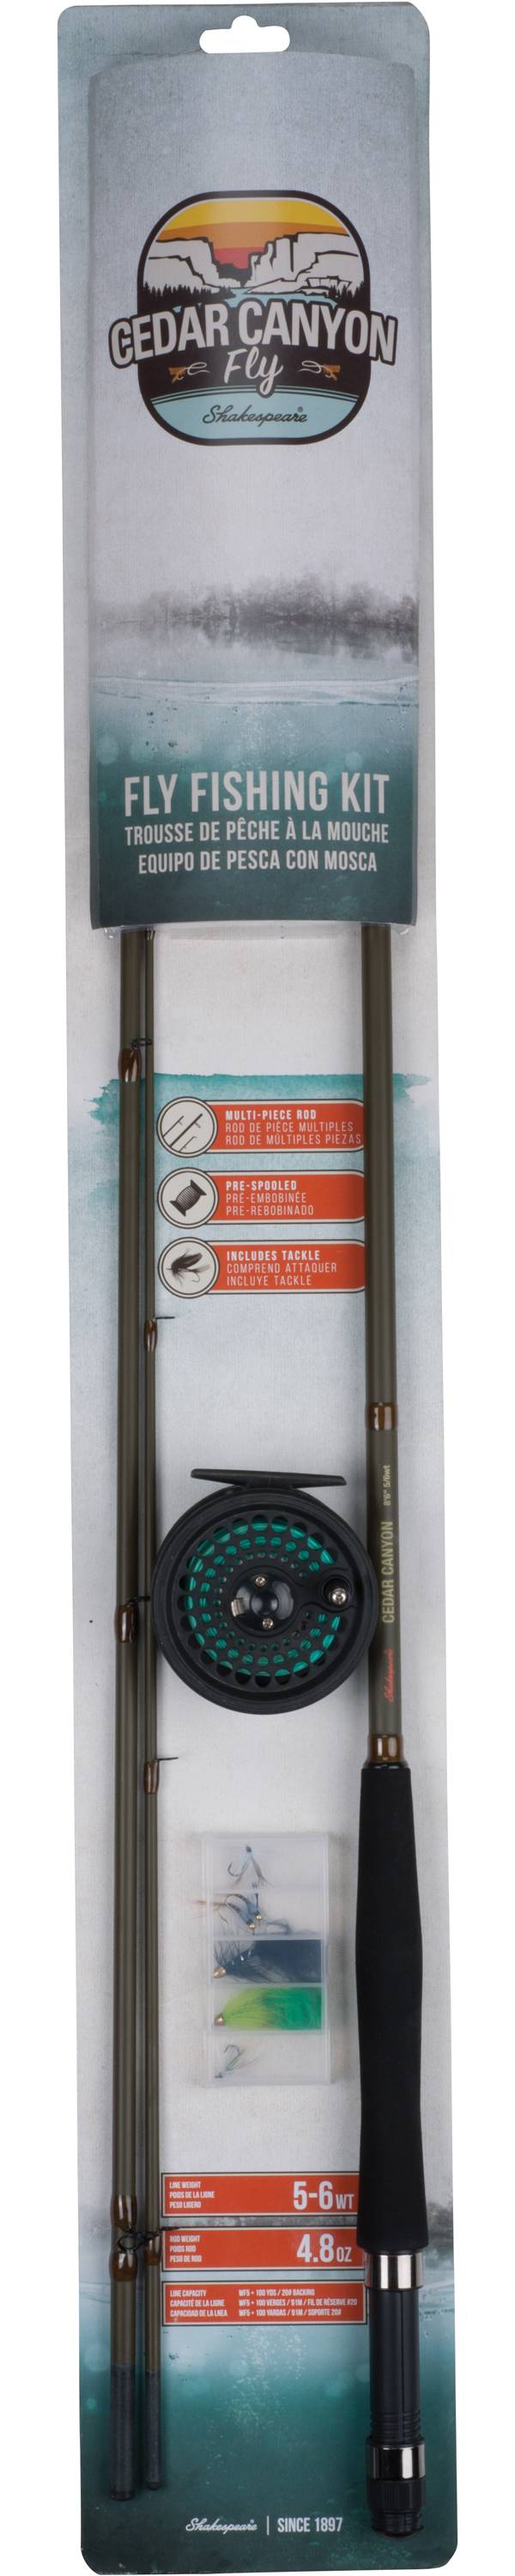 Shakespeare Cedar Canyon Fly Fishing Kit product image